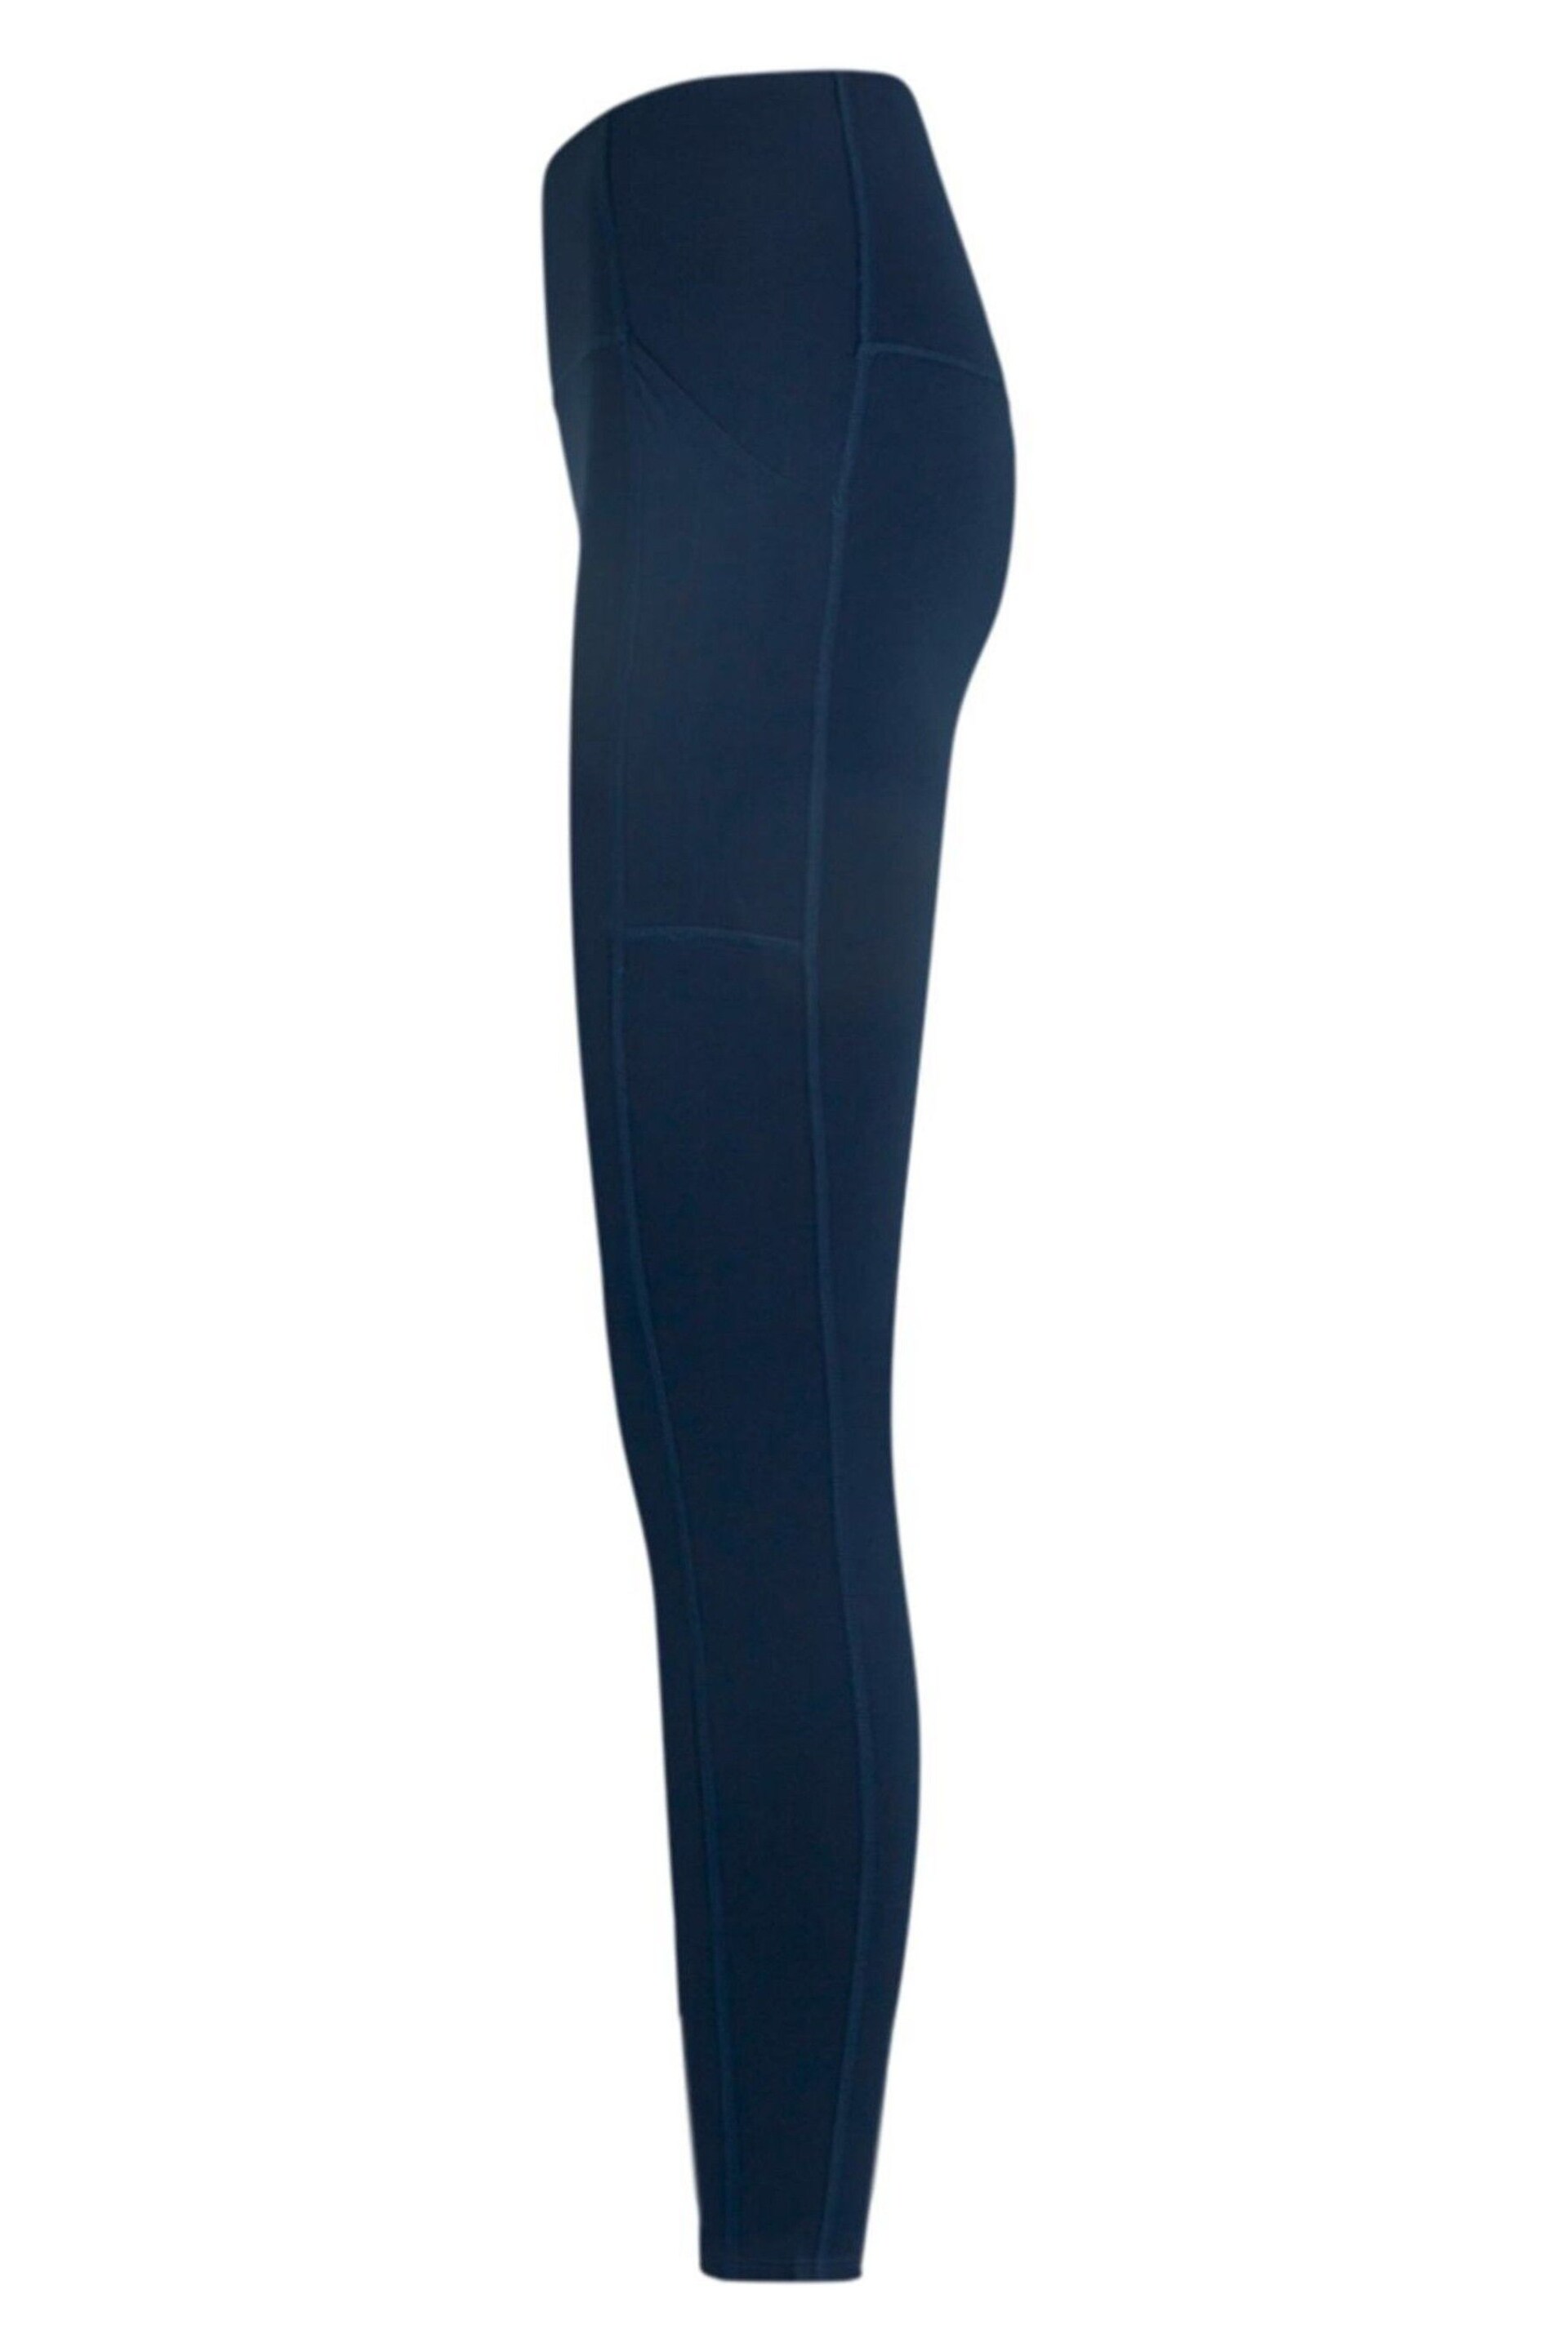 Girlfriend Collective High Rise Pocket Leggings - Image 8 of 8